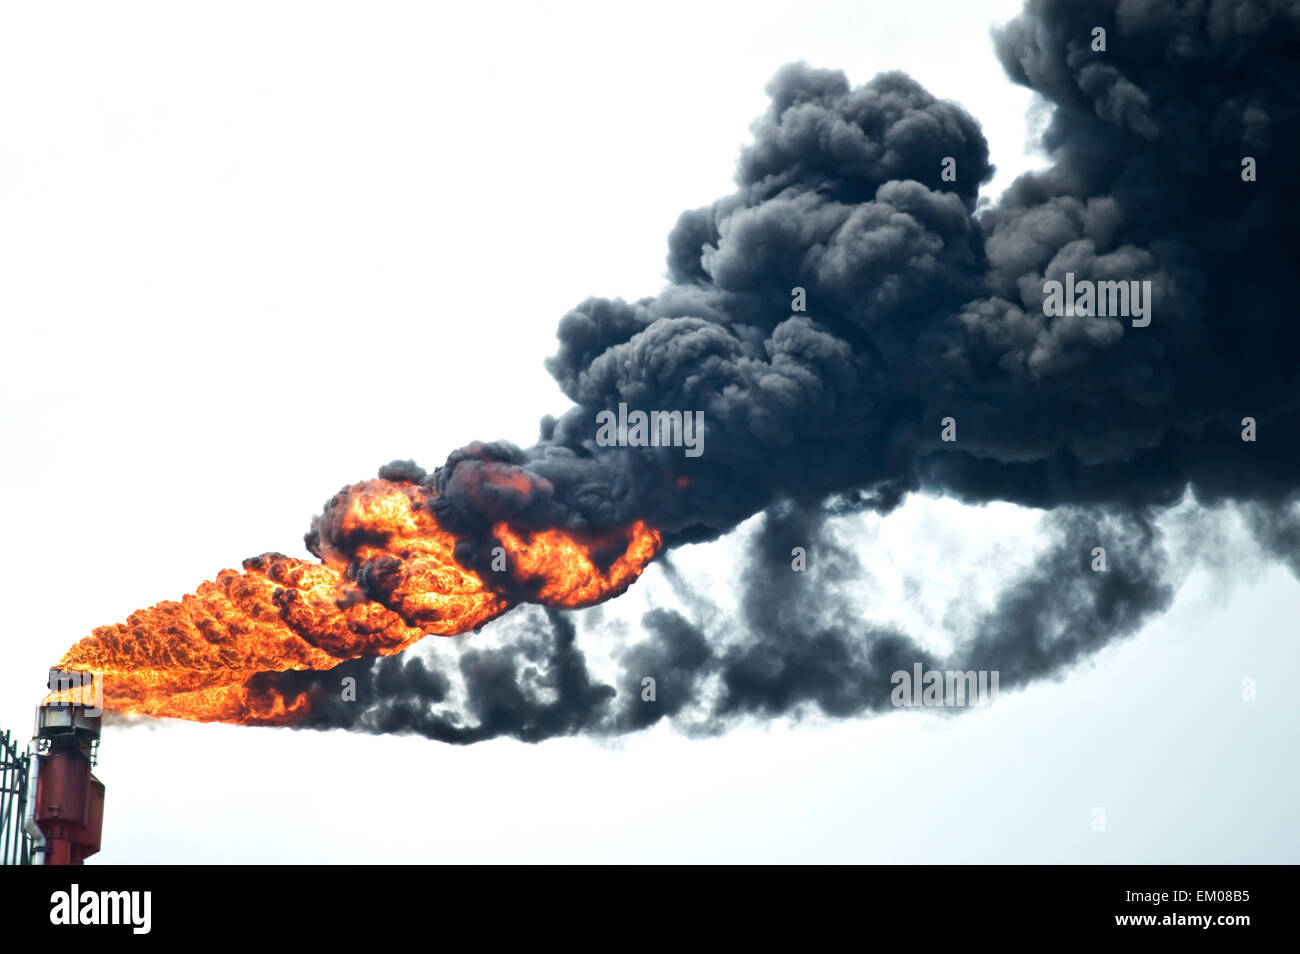 Heavy smoke from industrial chimney polluting the environment Stock Photo